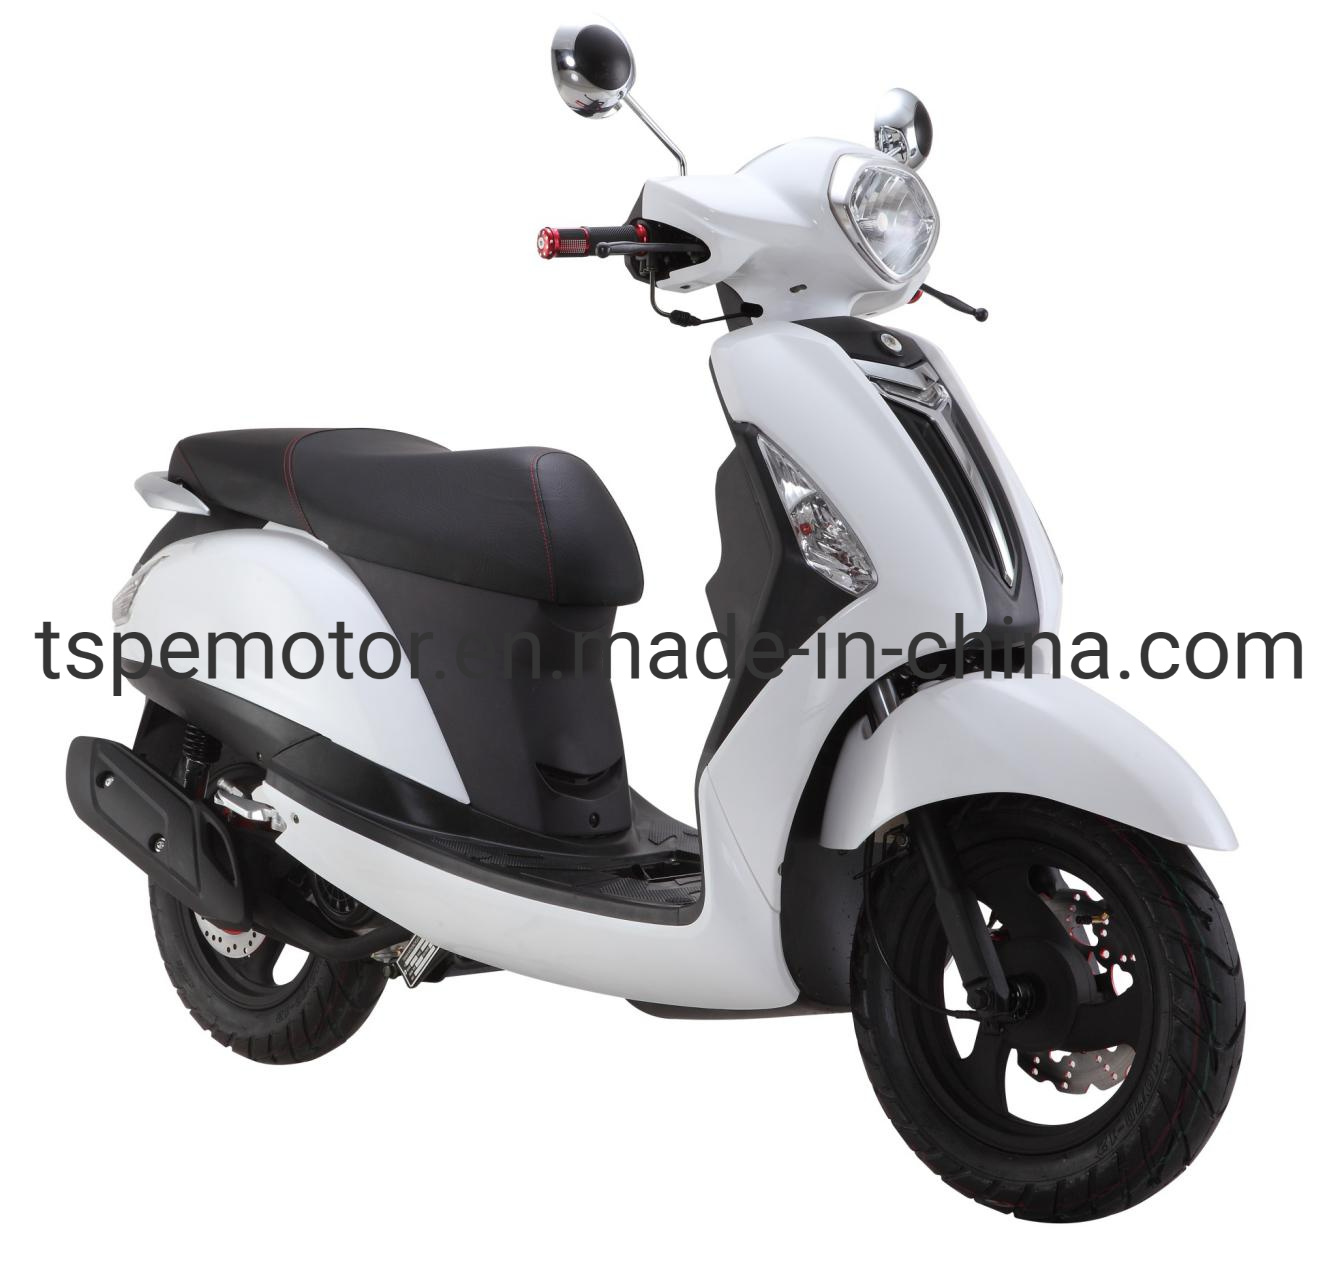 Gasoline Scooter Motorbike Motorcycle for Yb150t